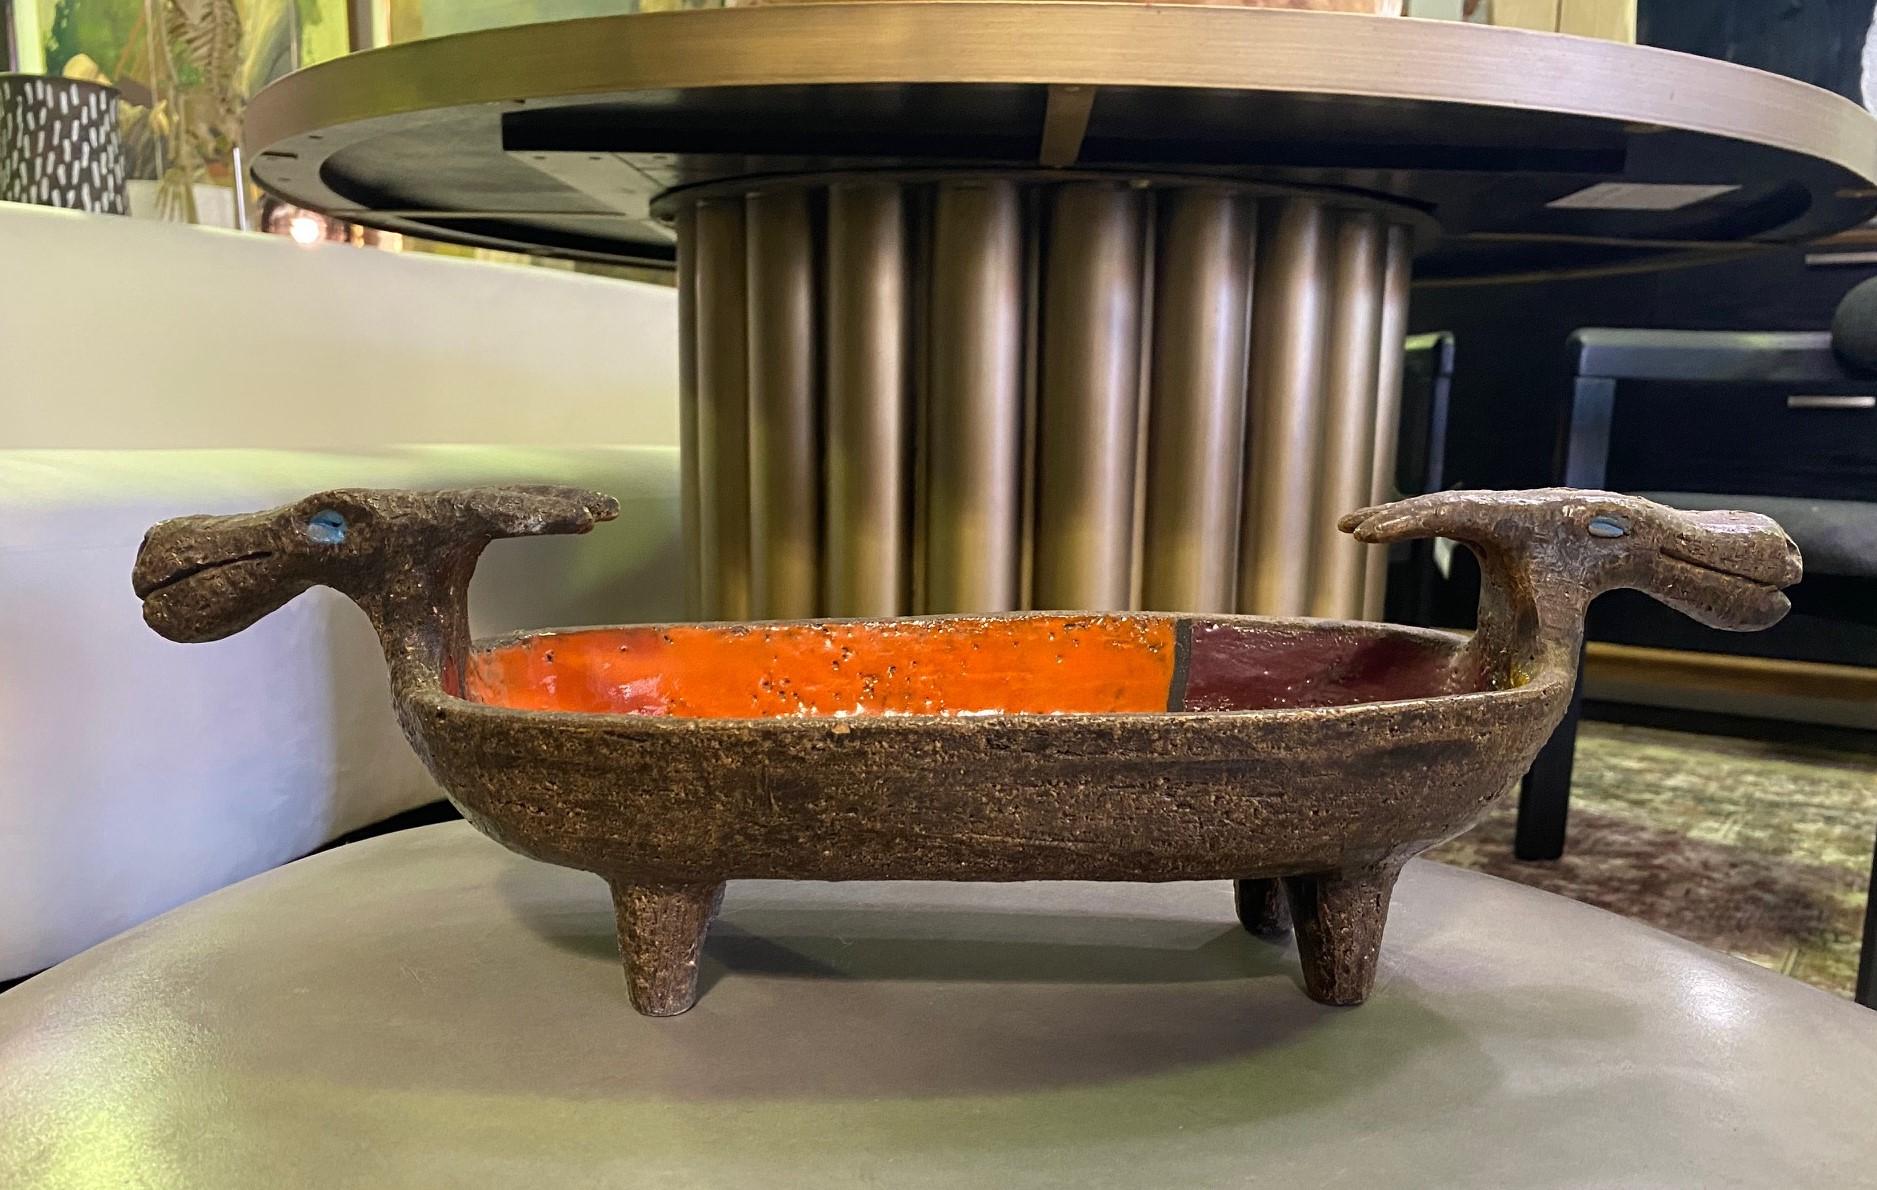 A very rare and scarce, exquisite large pottery bowl from Italian designer Aldo Londi for Bitossi, Italy. This piece features a dragon's head on each end. 

The bowl is impeccable and displays the vibrantly colored Mondrian design glazed interior.